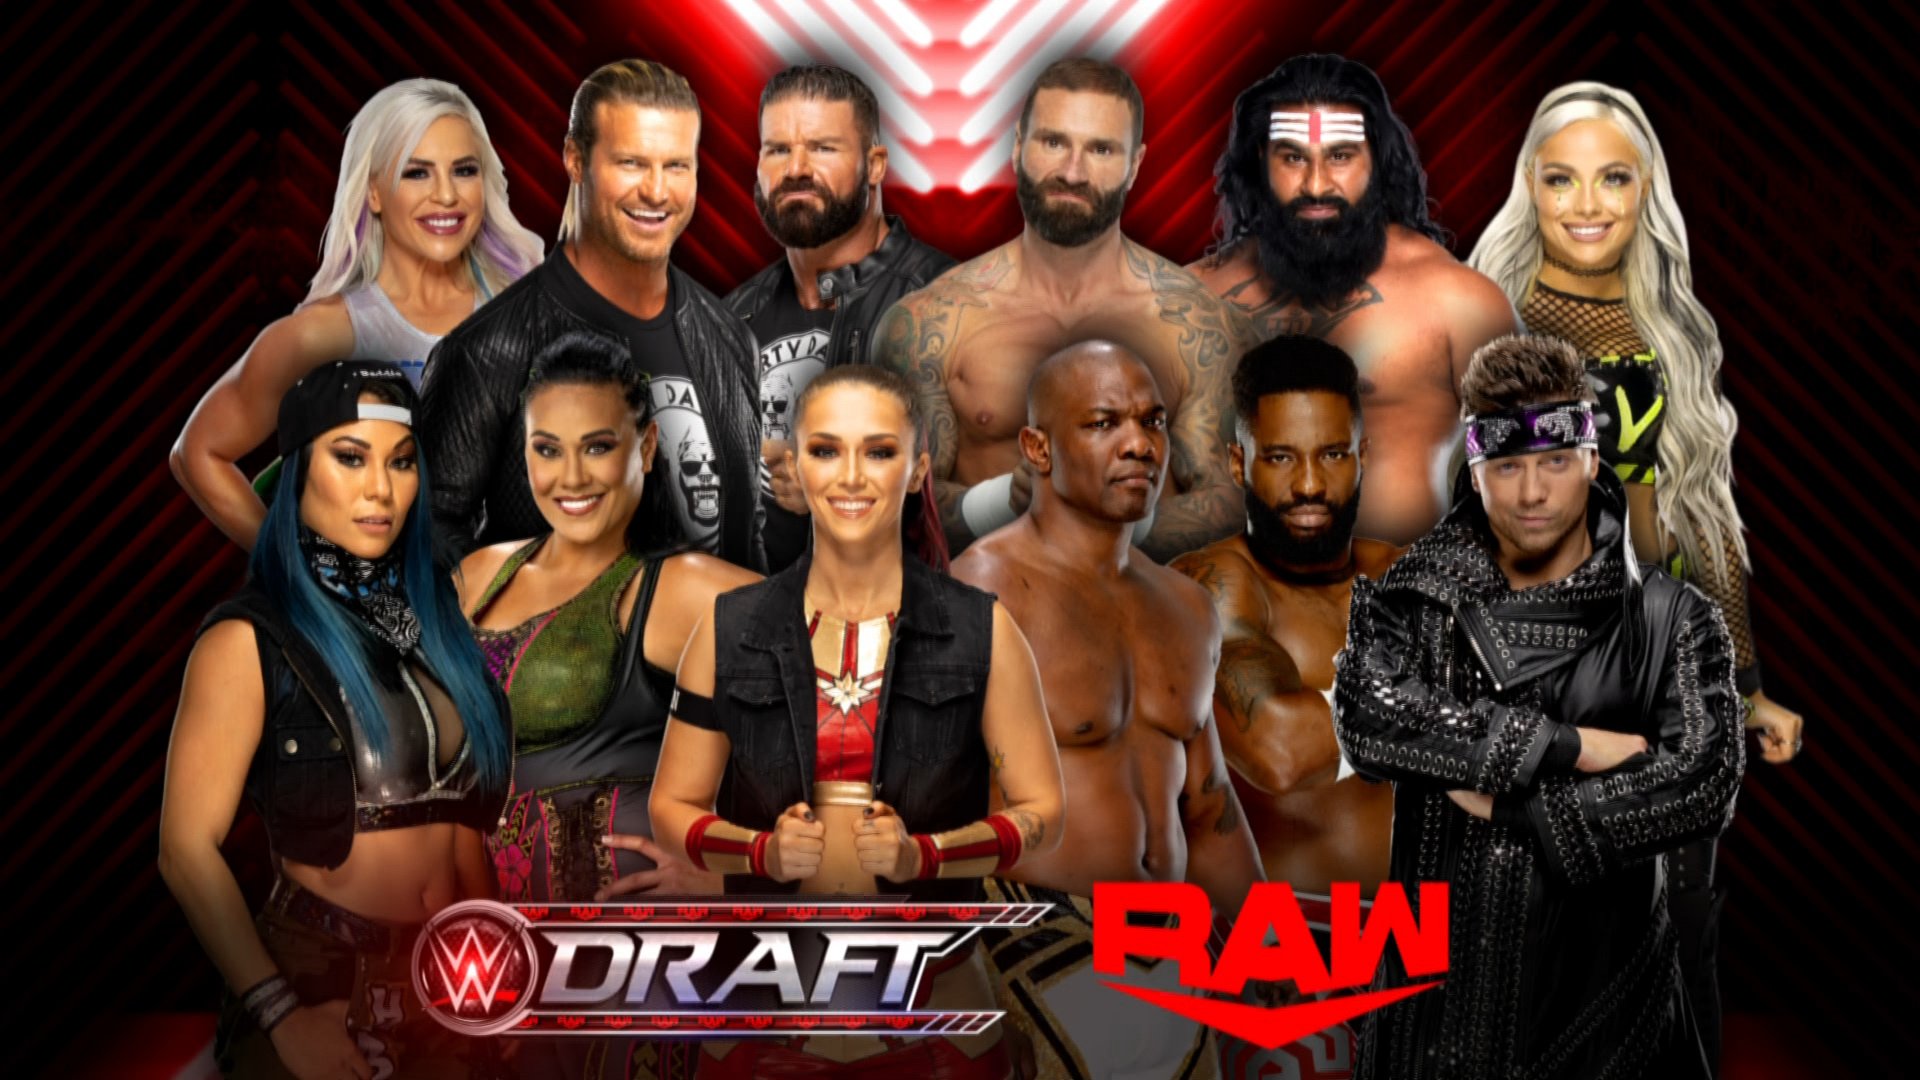 Wwe Draft 21 Complete Roster For Raw Smackdown Free Agents Revealed